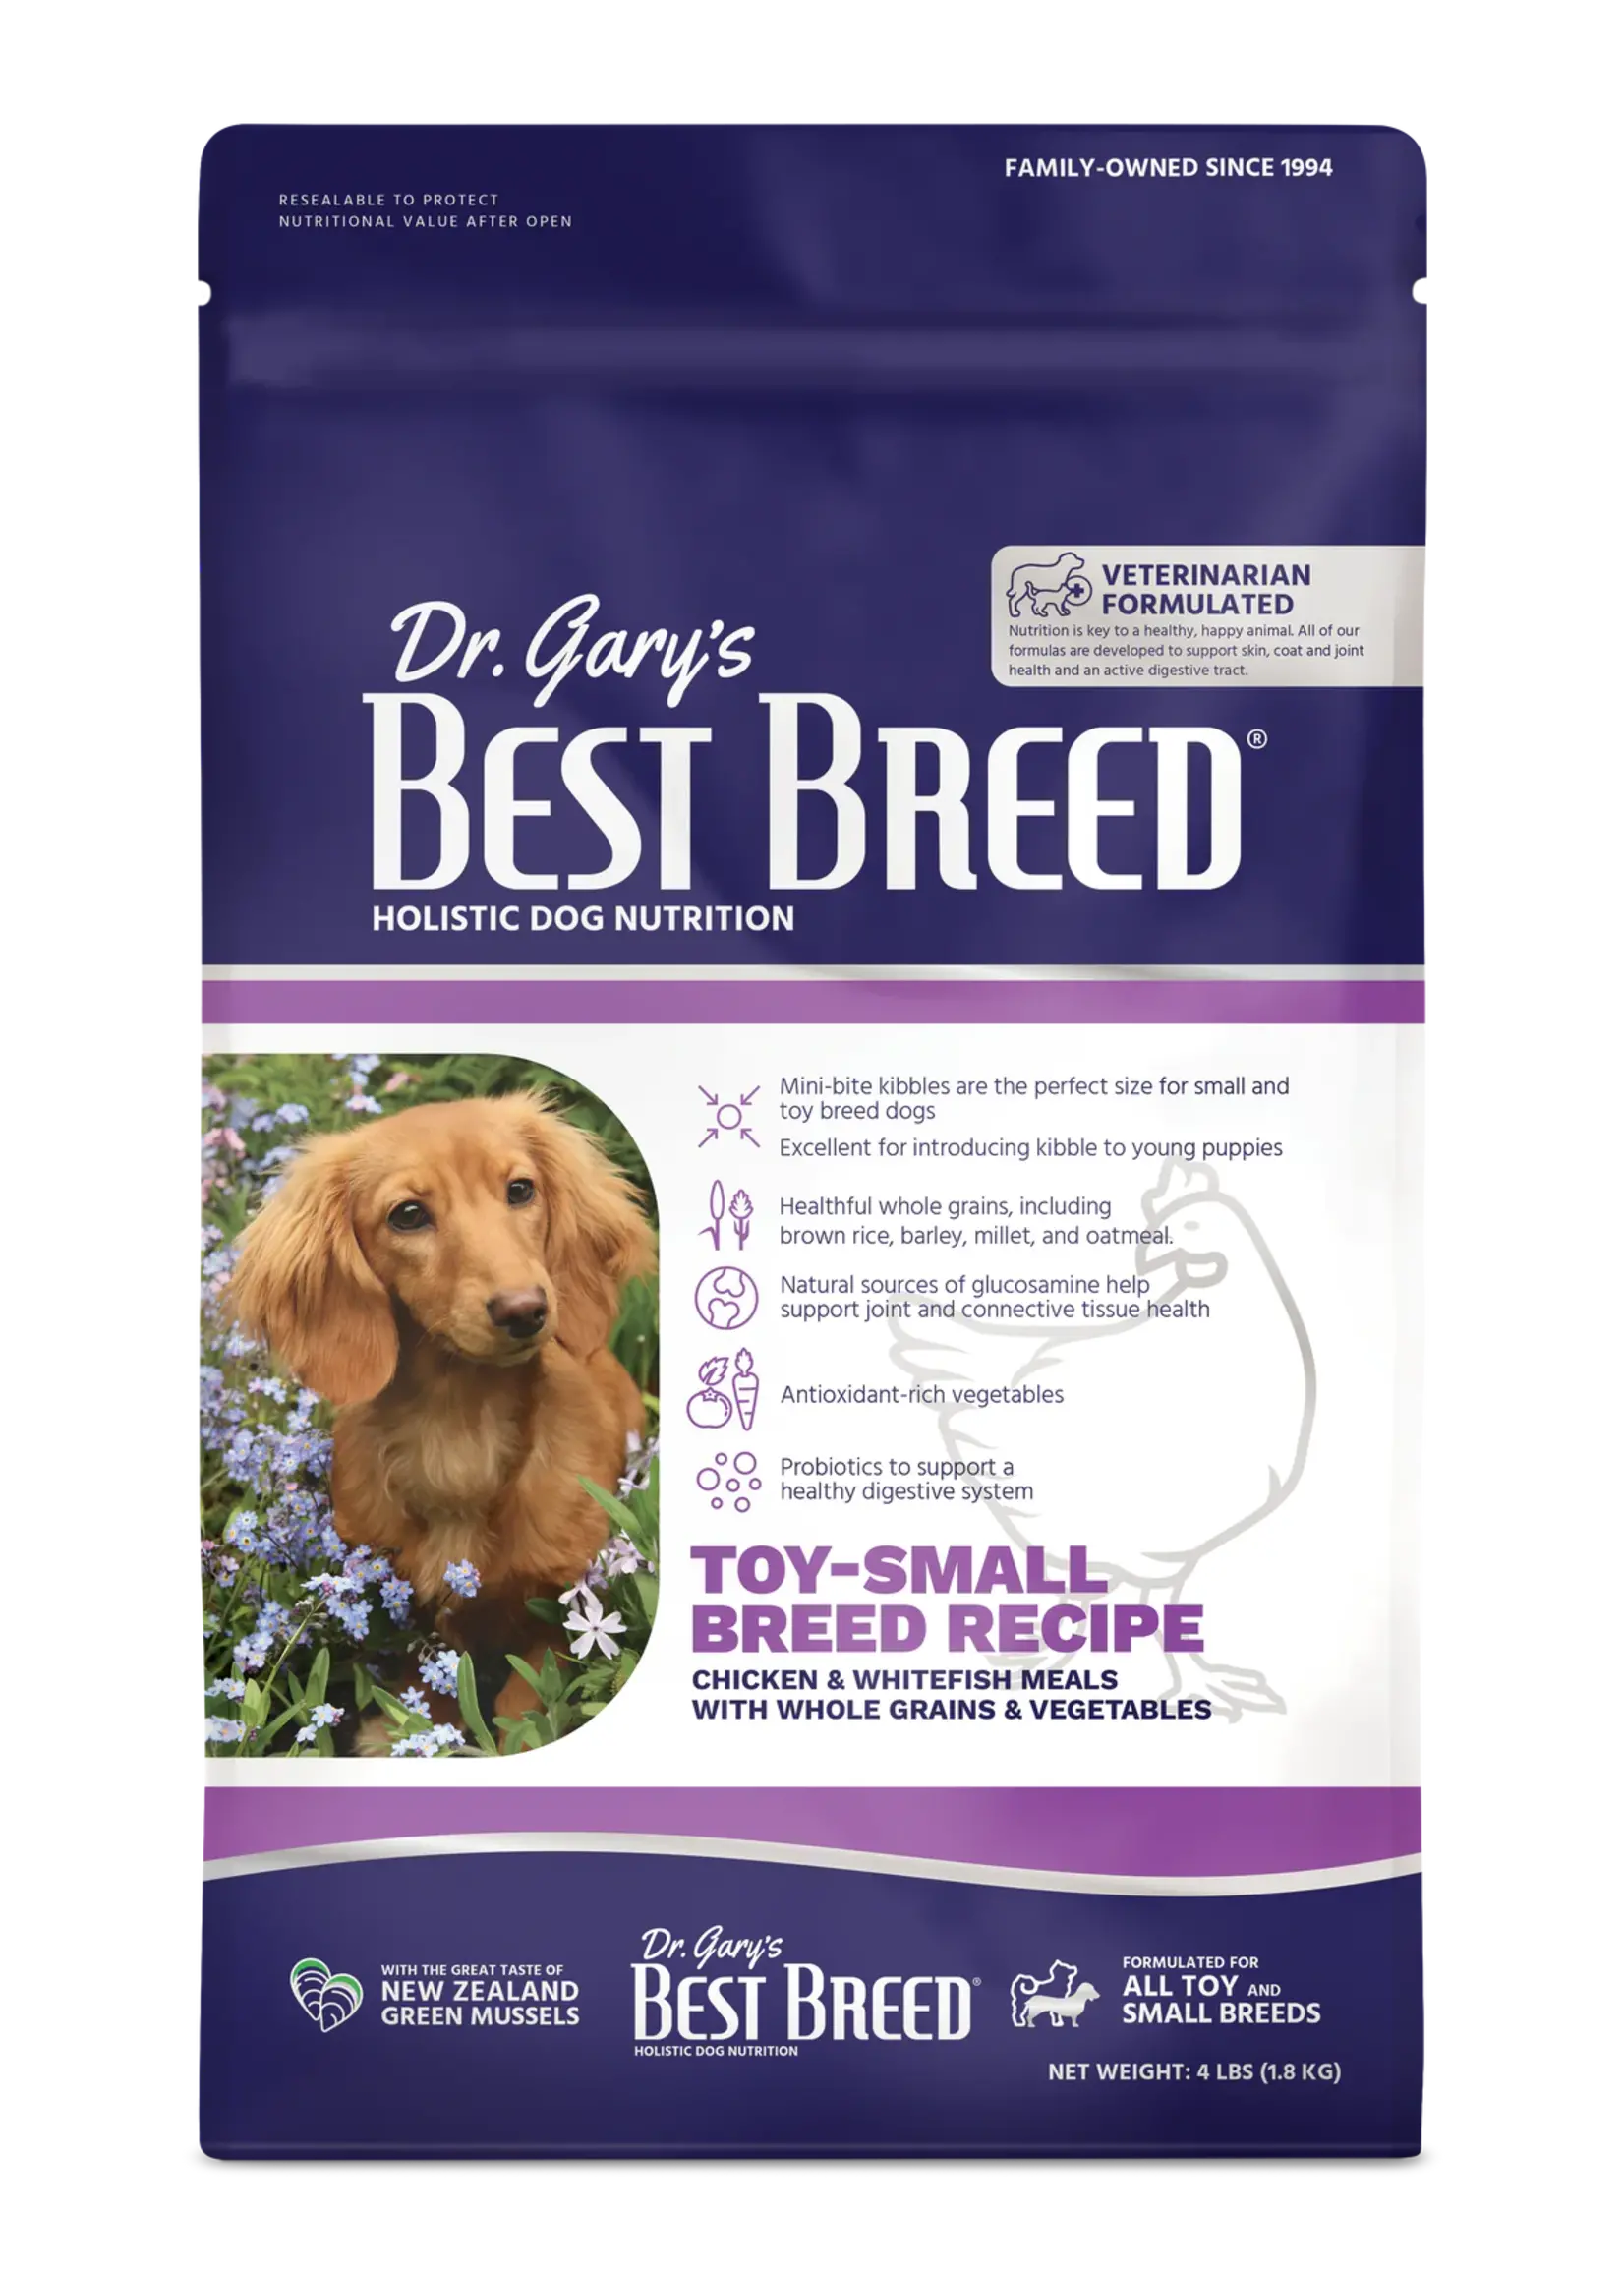 Dr. Gary's Best Breed Dr. Gary's Best Breed Toy-Small Breed